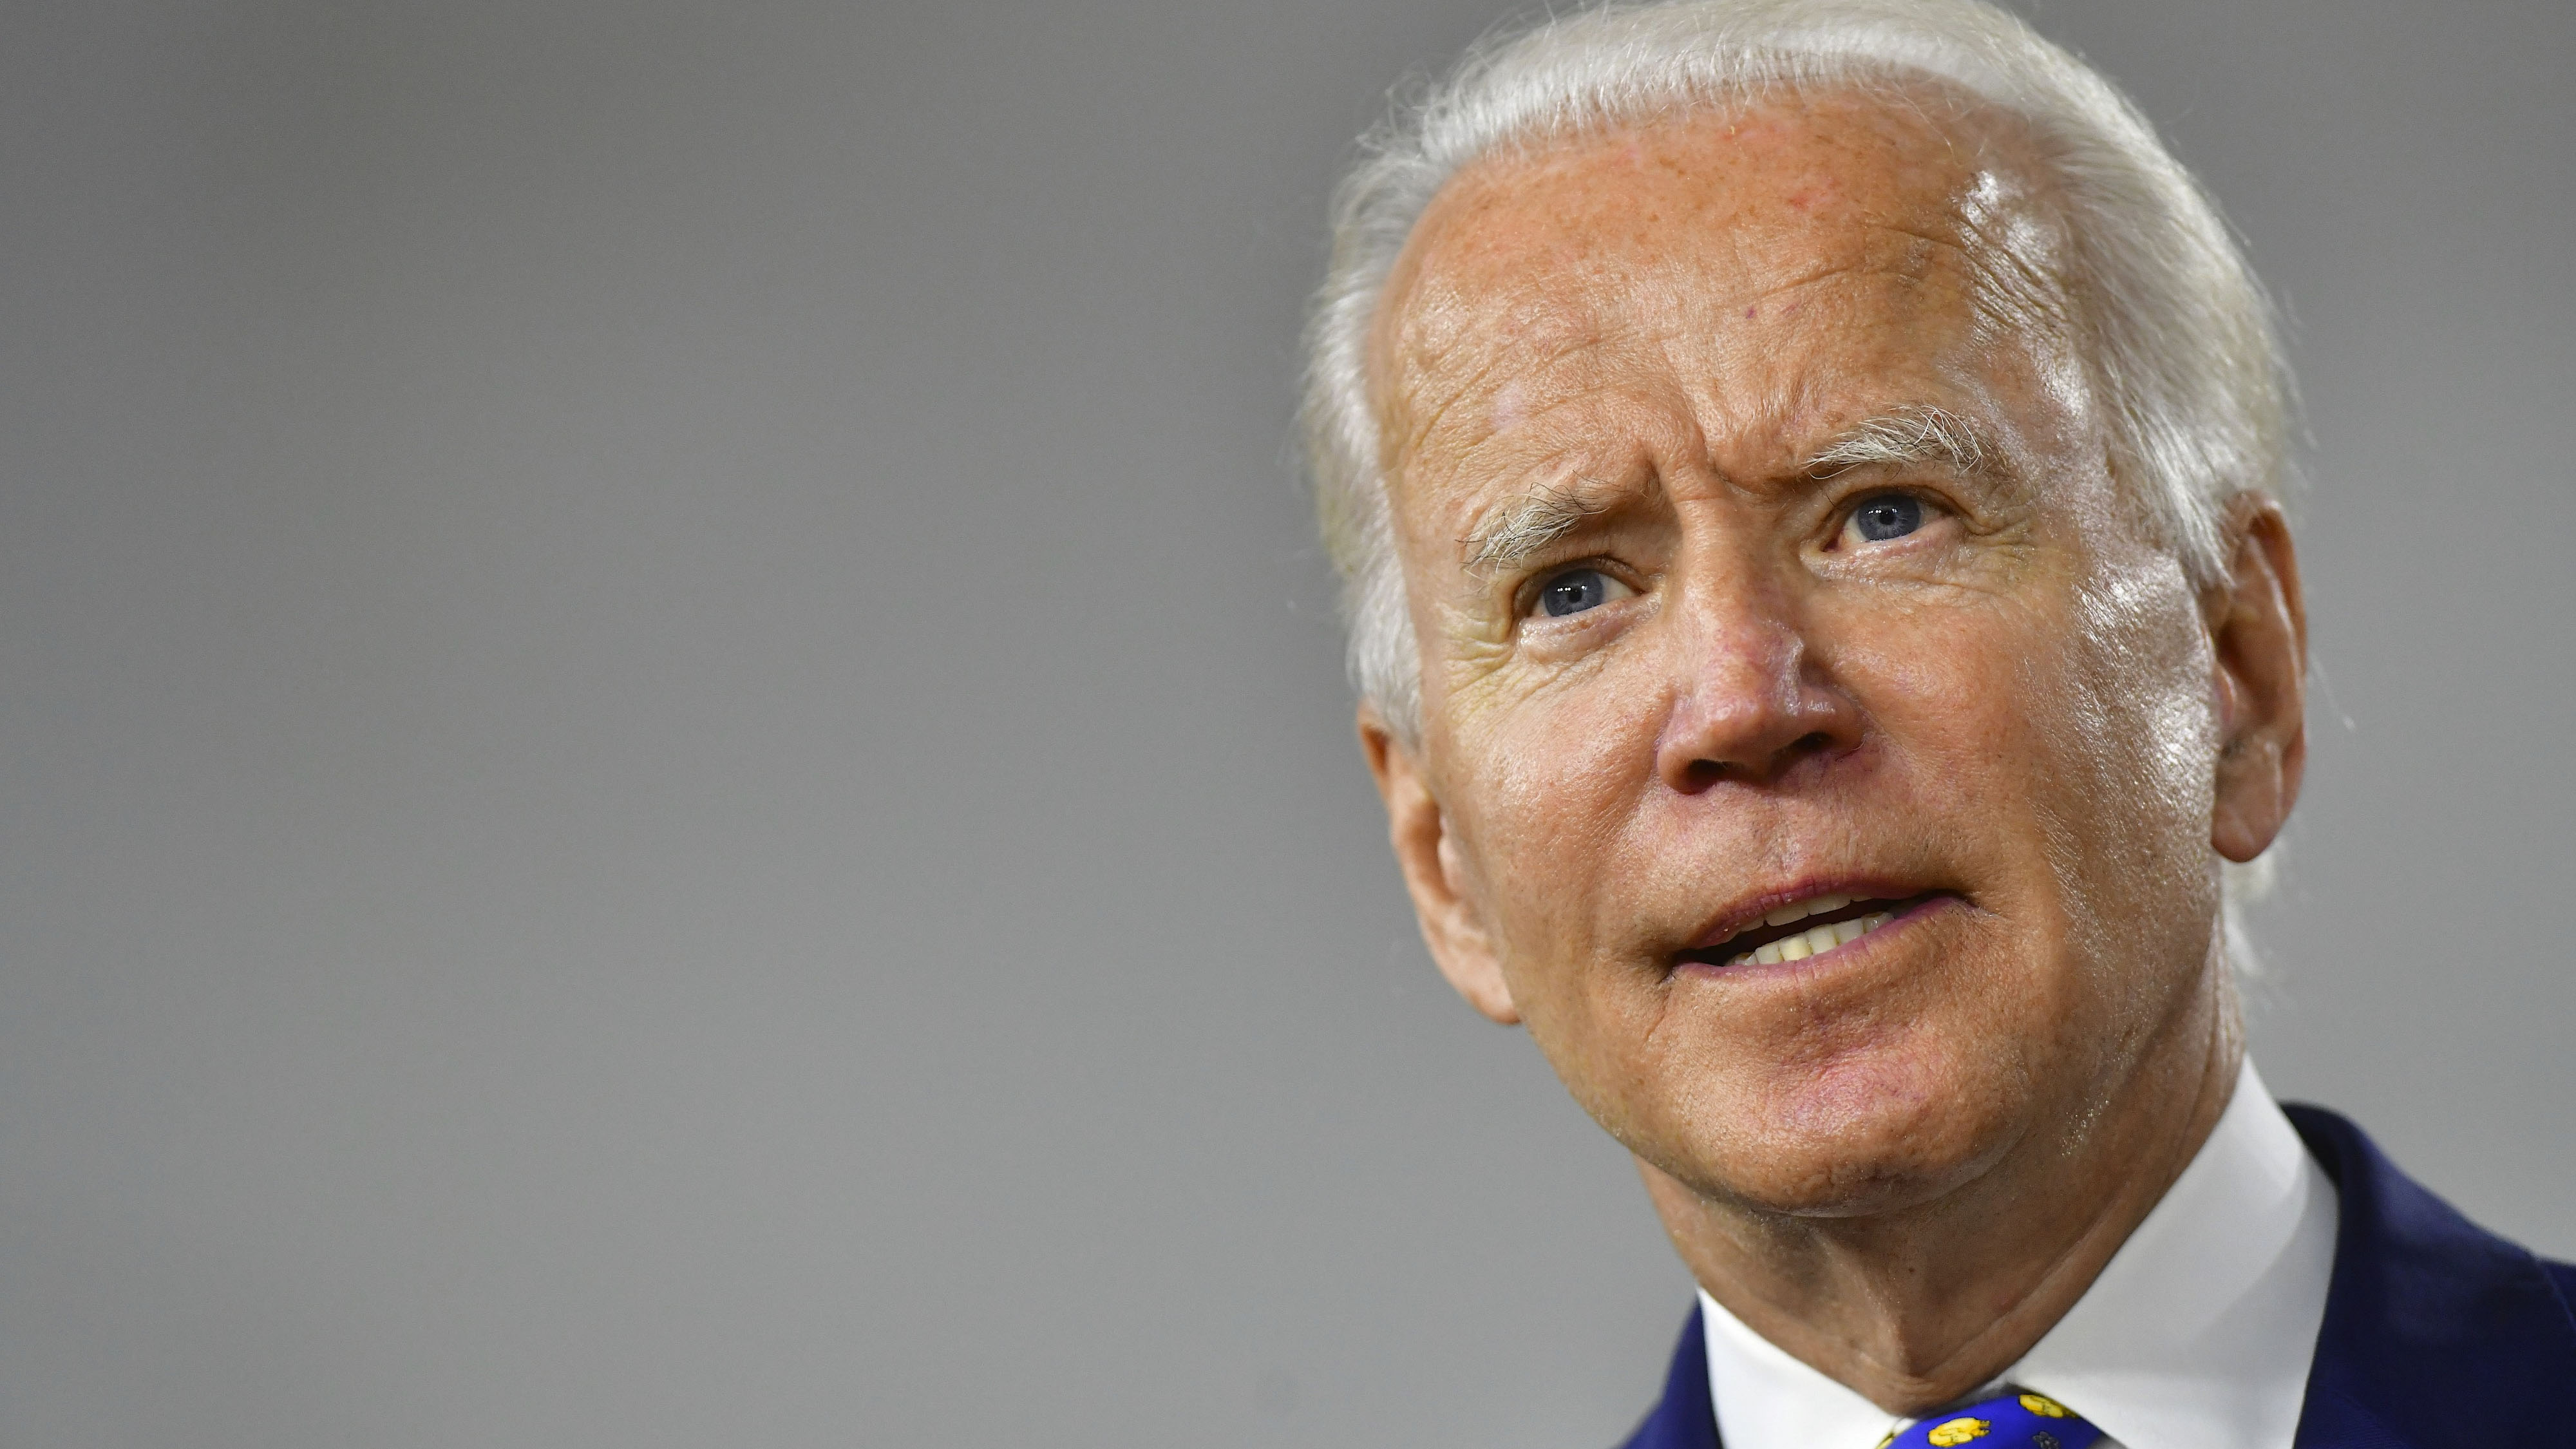 Biden on Cognitive Test: ‘Why the Hell Would I Take a Test?'